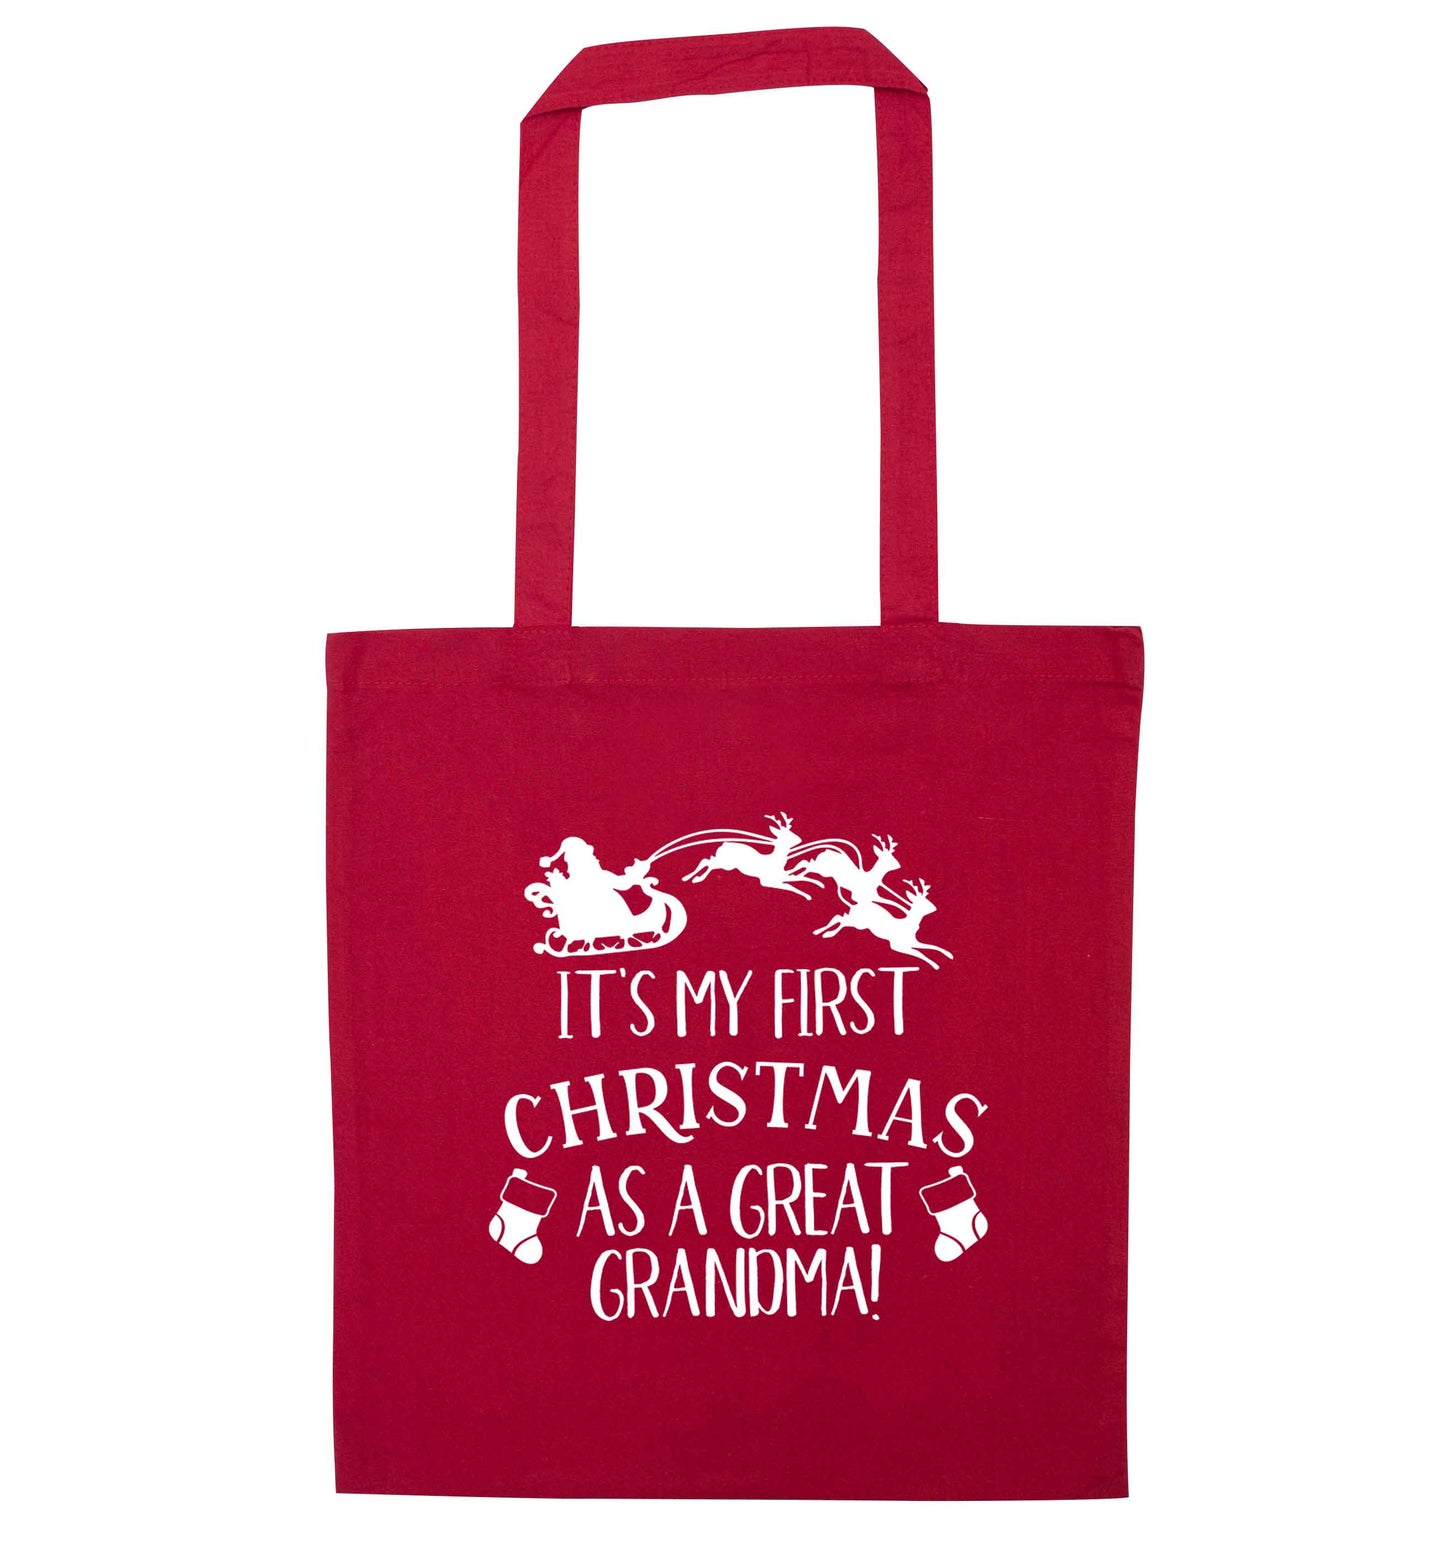 It's my first Christmas as a great grandma! red tote bag